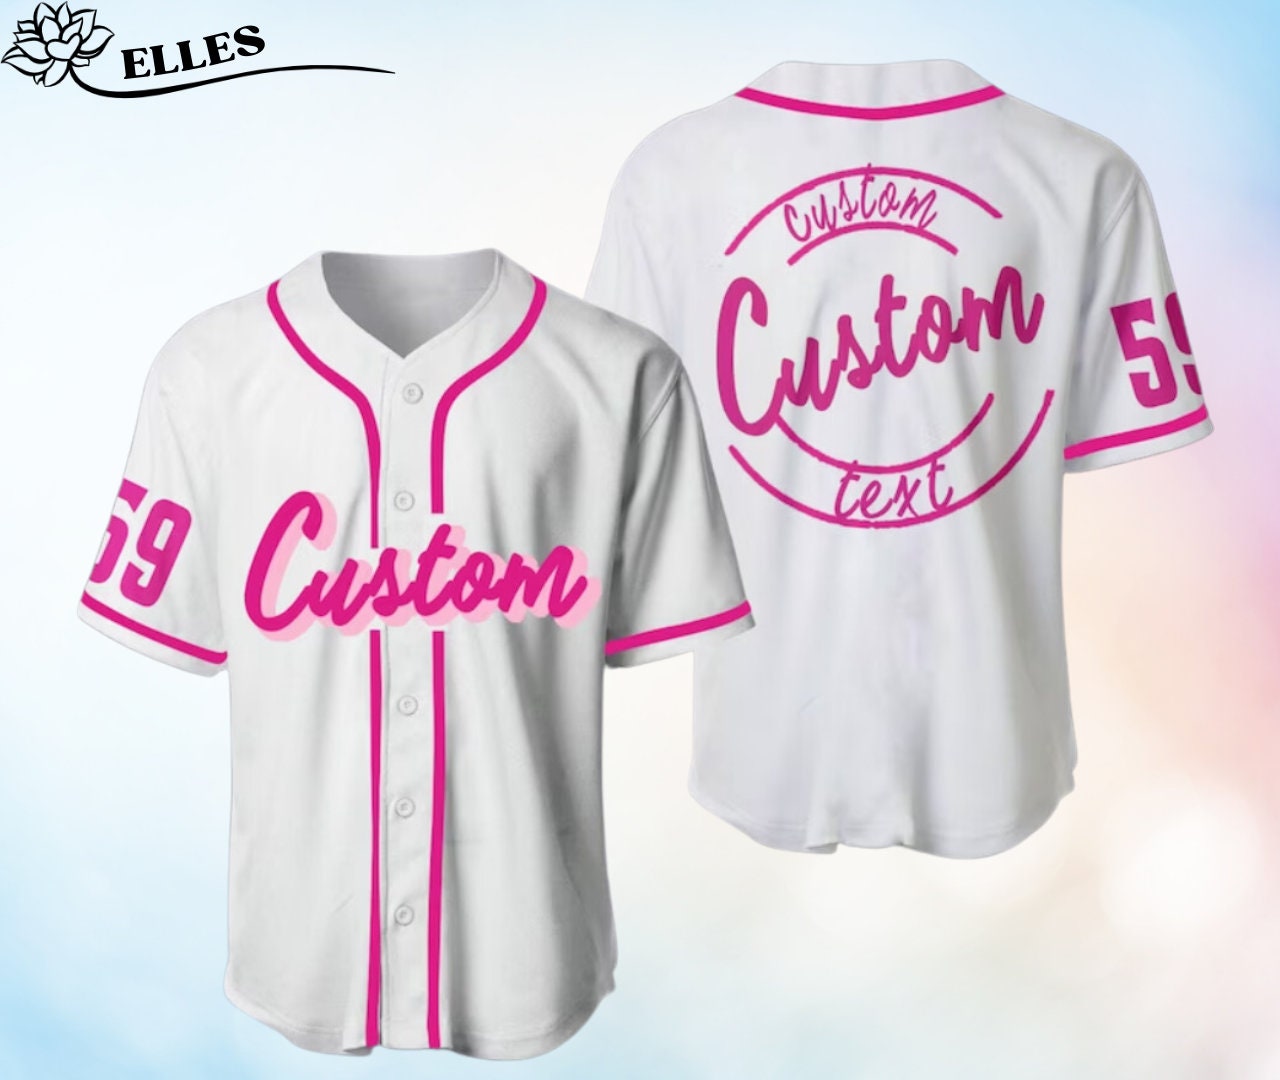 Tribute 2-Button Camo Trim Baseball Jersey Team name Tail Names and Numbers